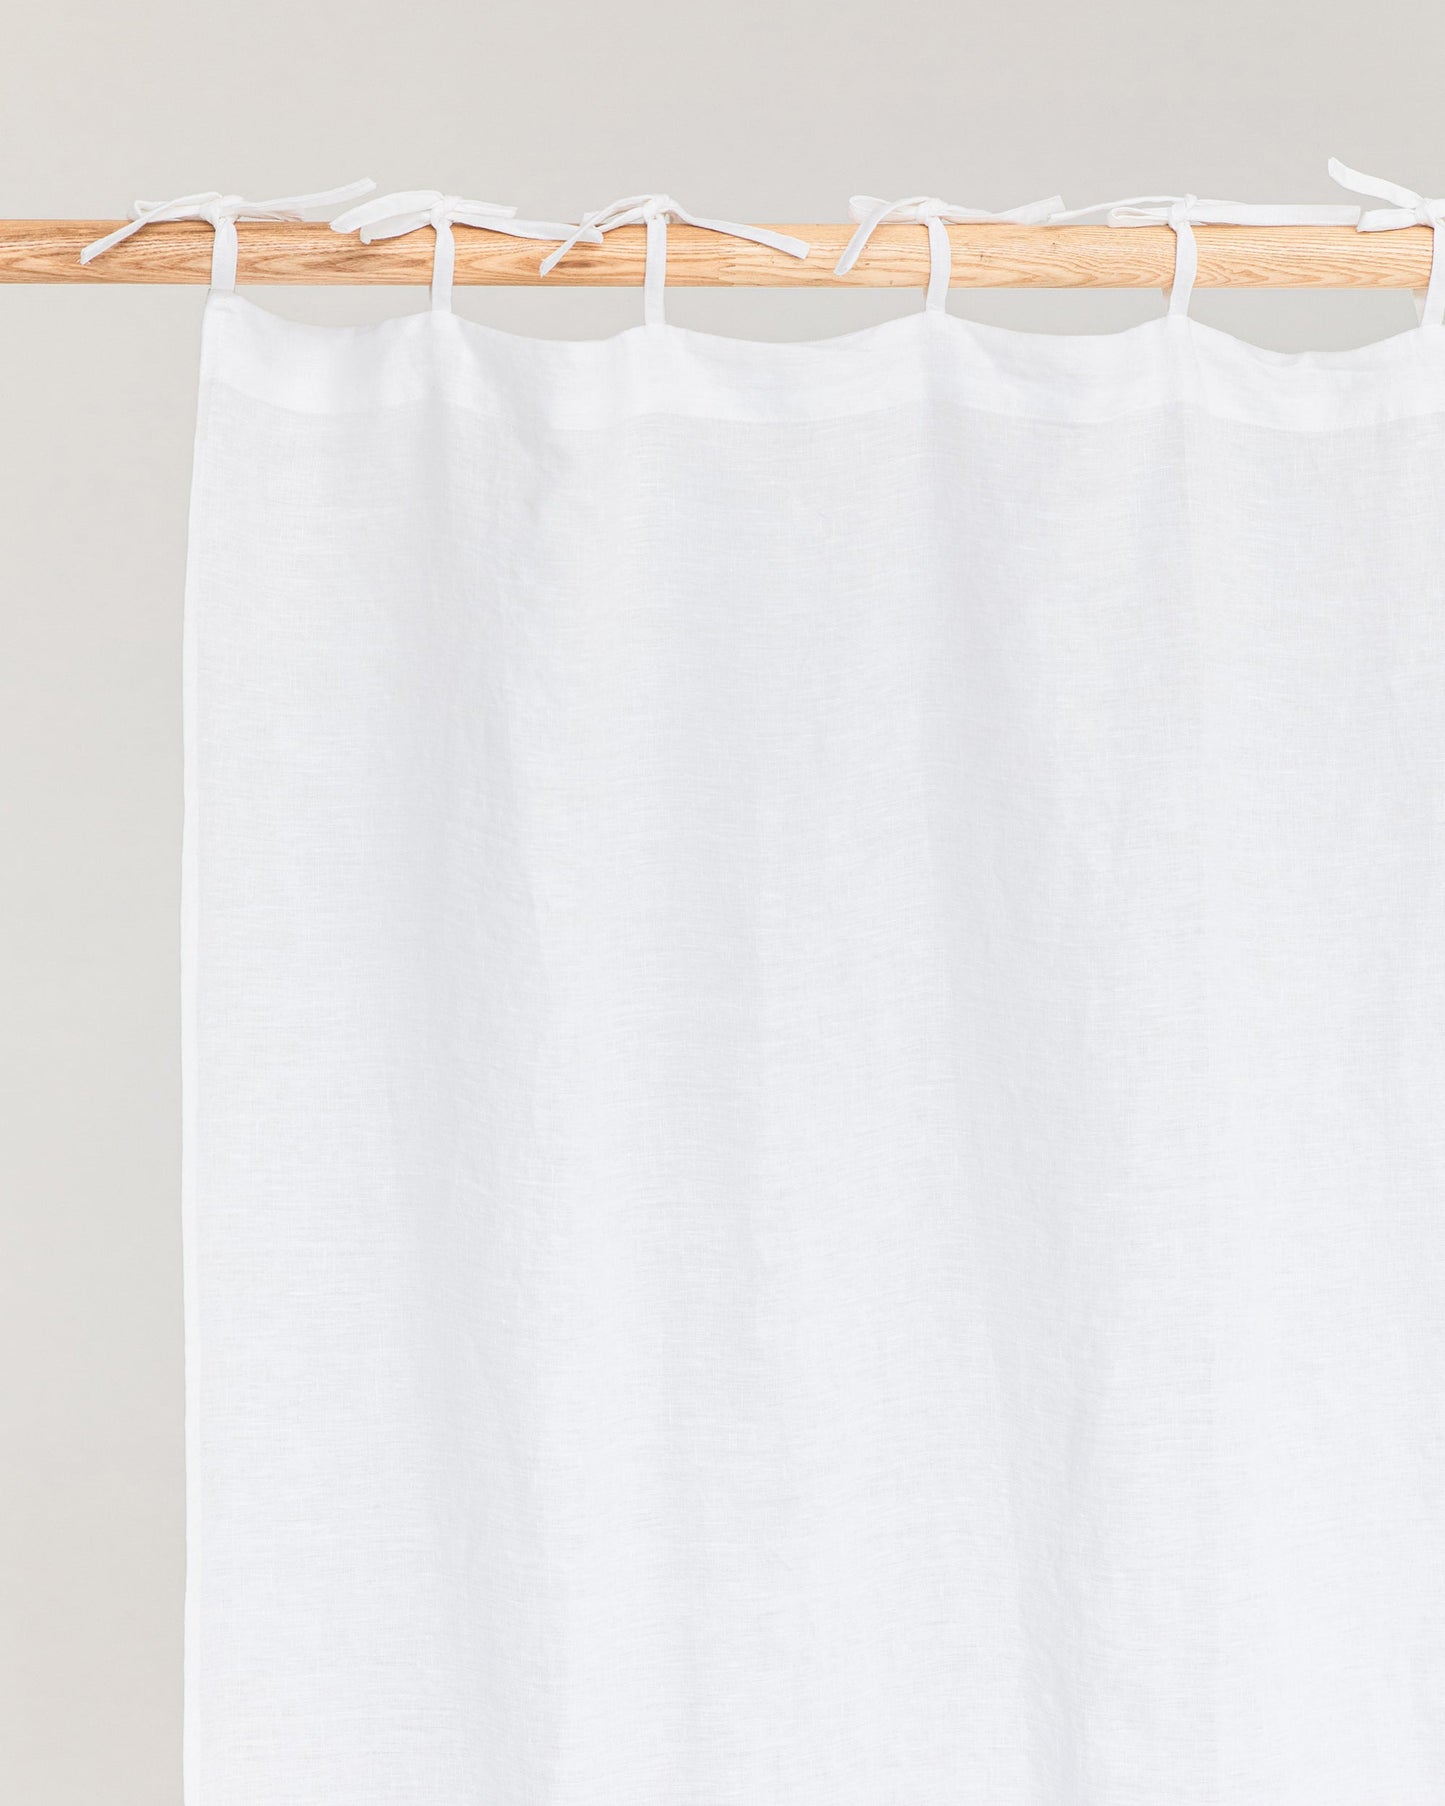 Tie top linen curtain panel (1 pcs) in White - MagicLinen